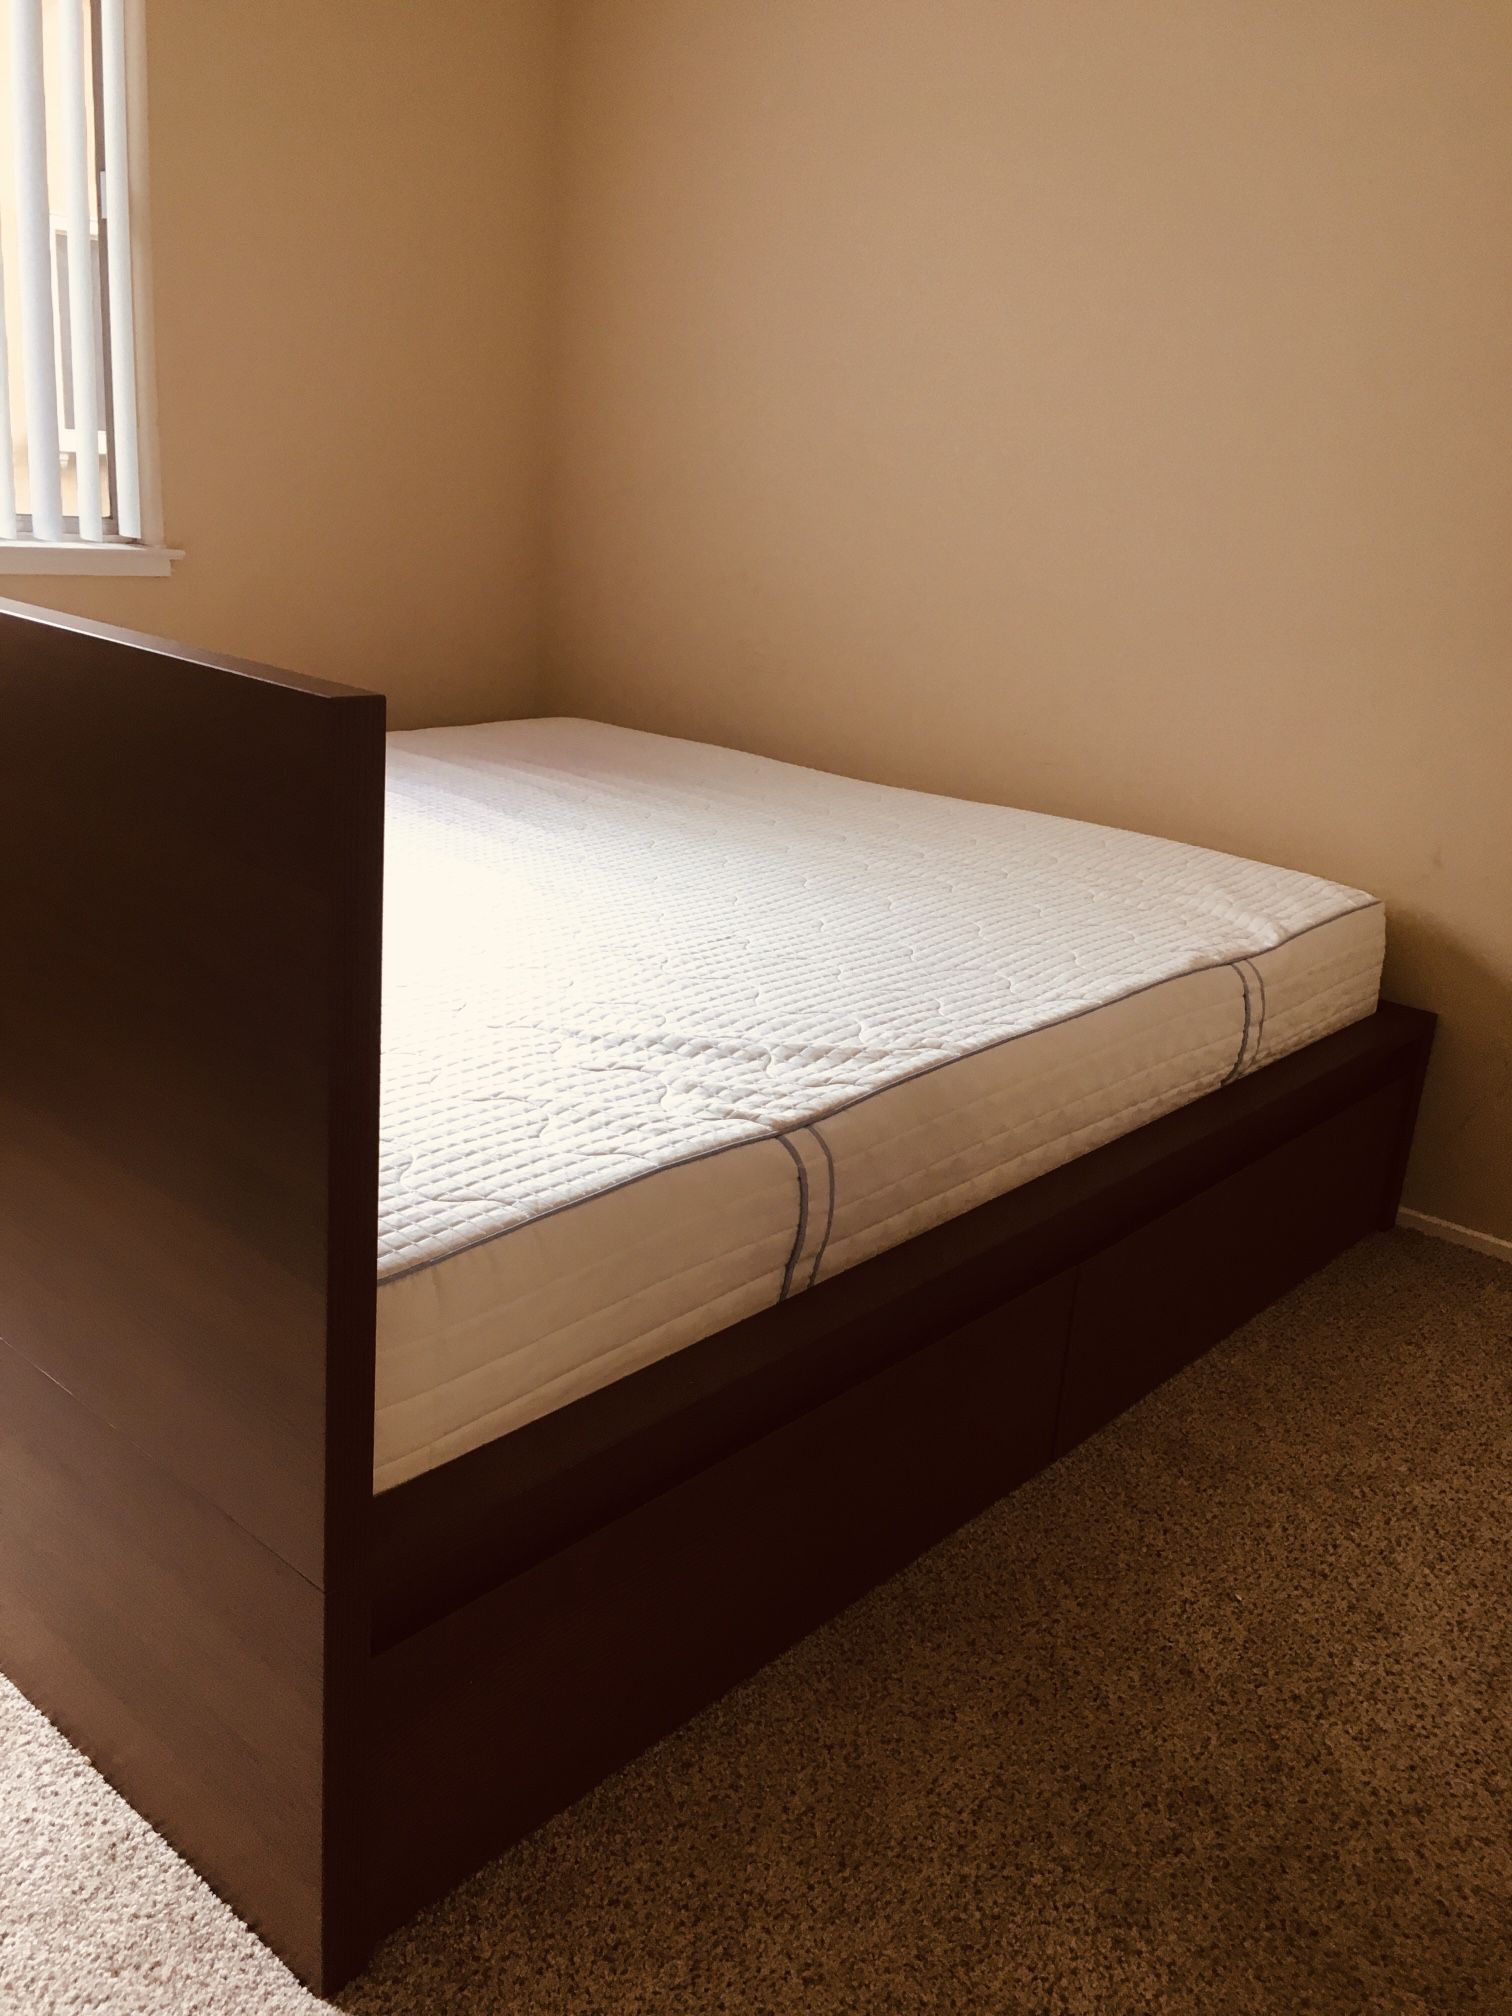 IKEA Malm King Bed Frame And Mattress Bought 3 Months Back